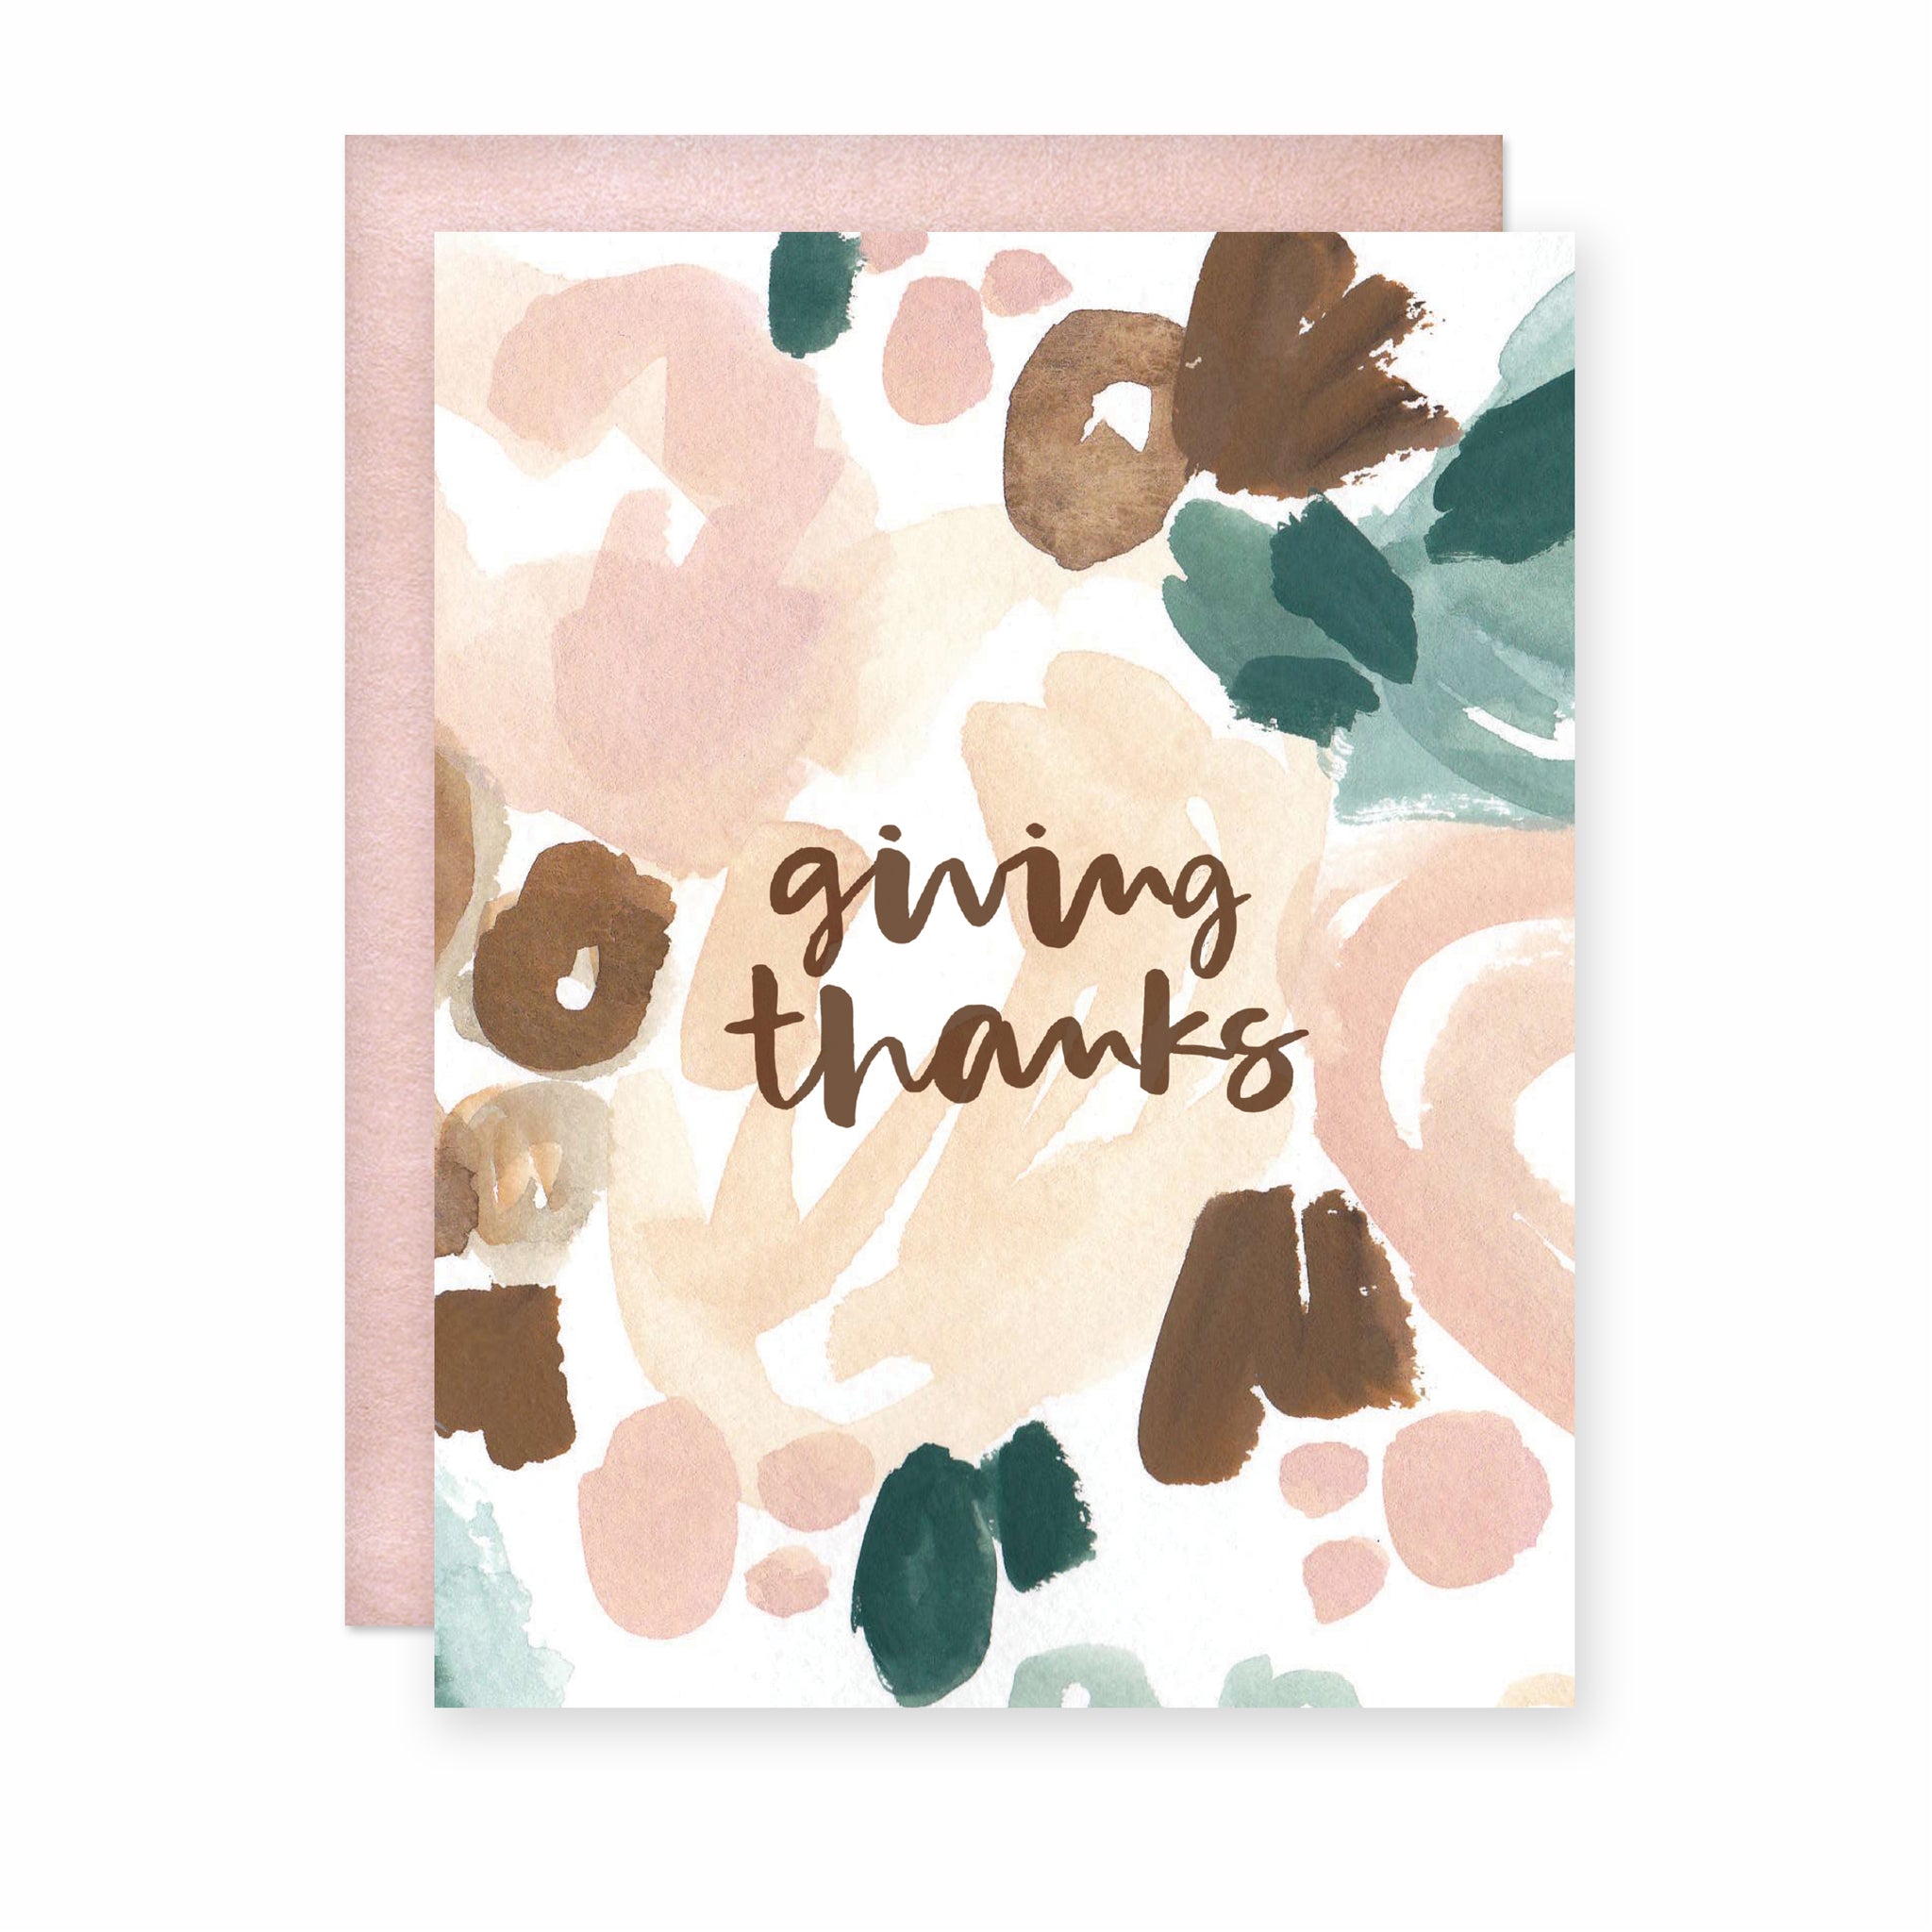 Giving Thanks Card (Box Set of 8)